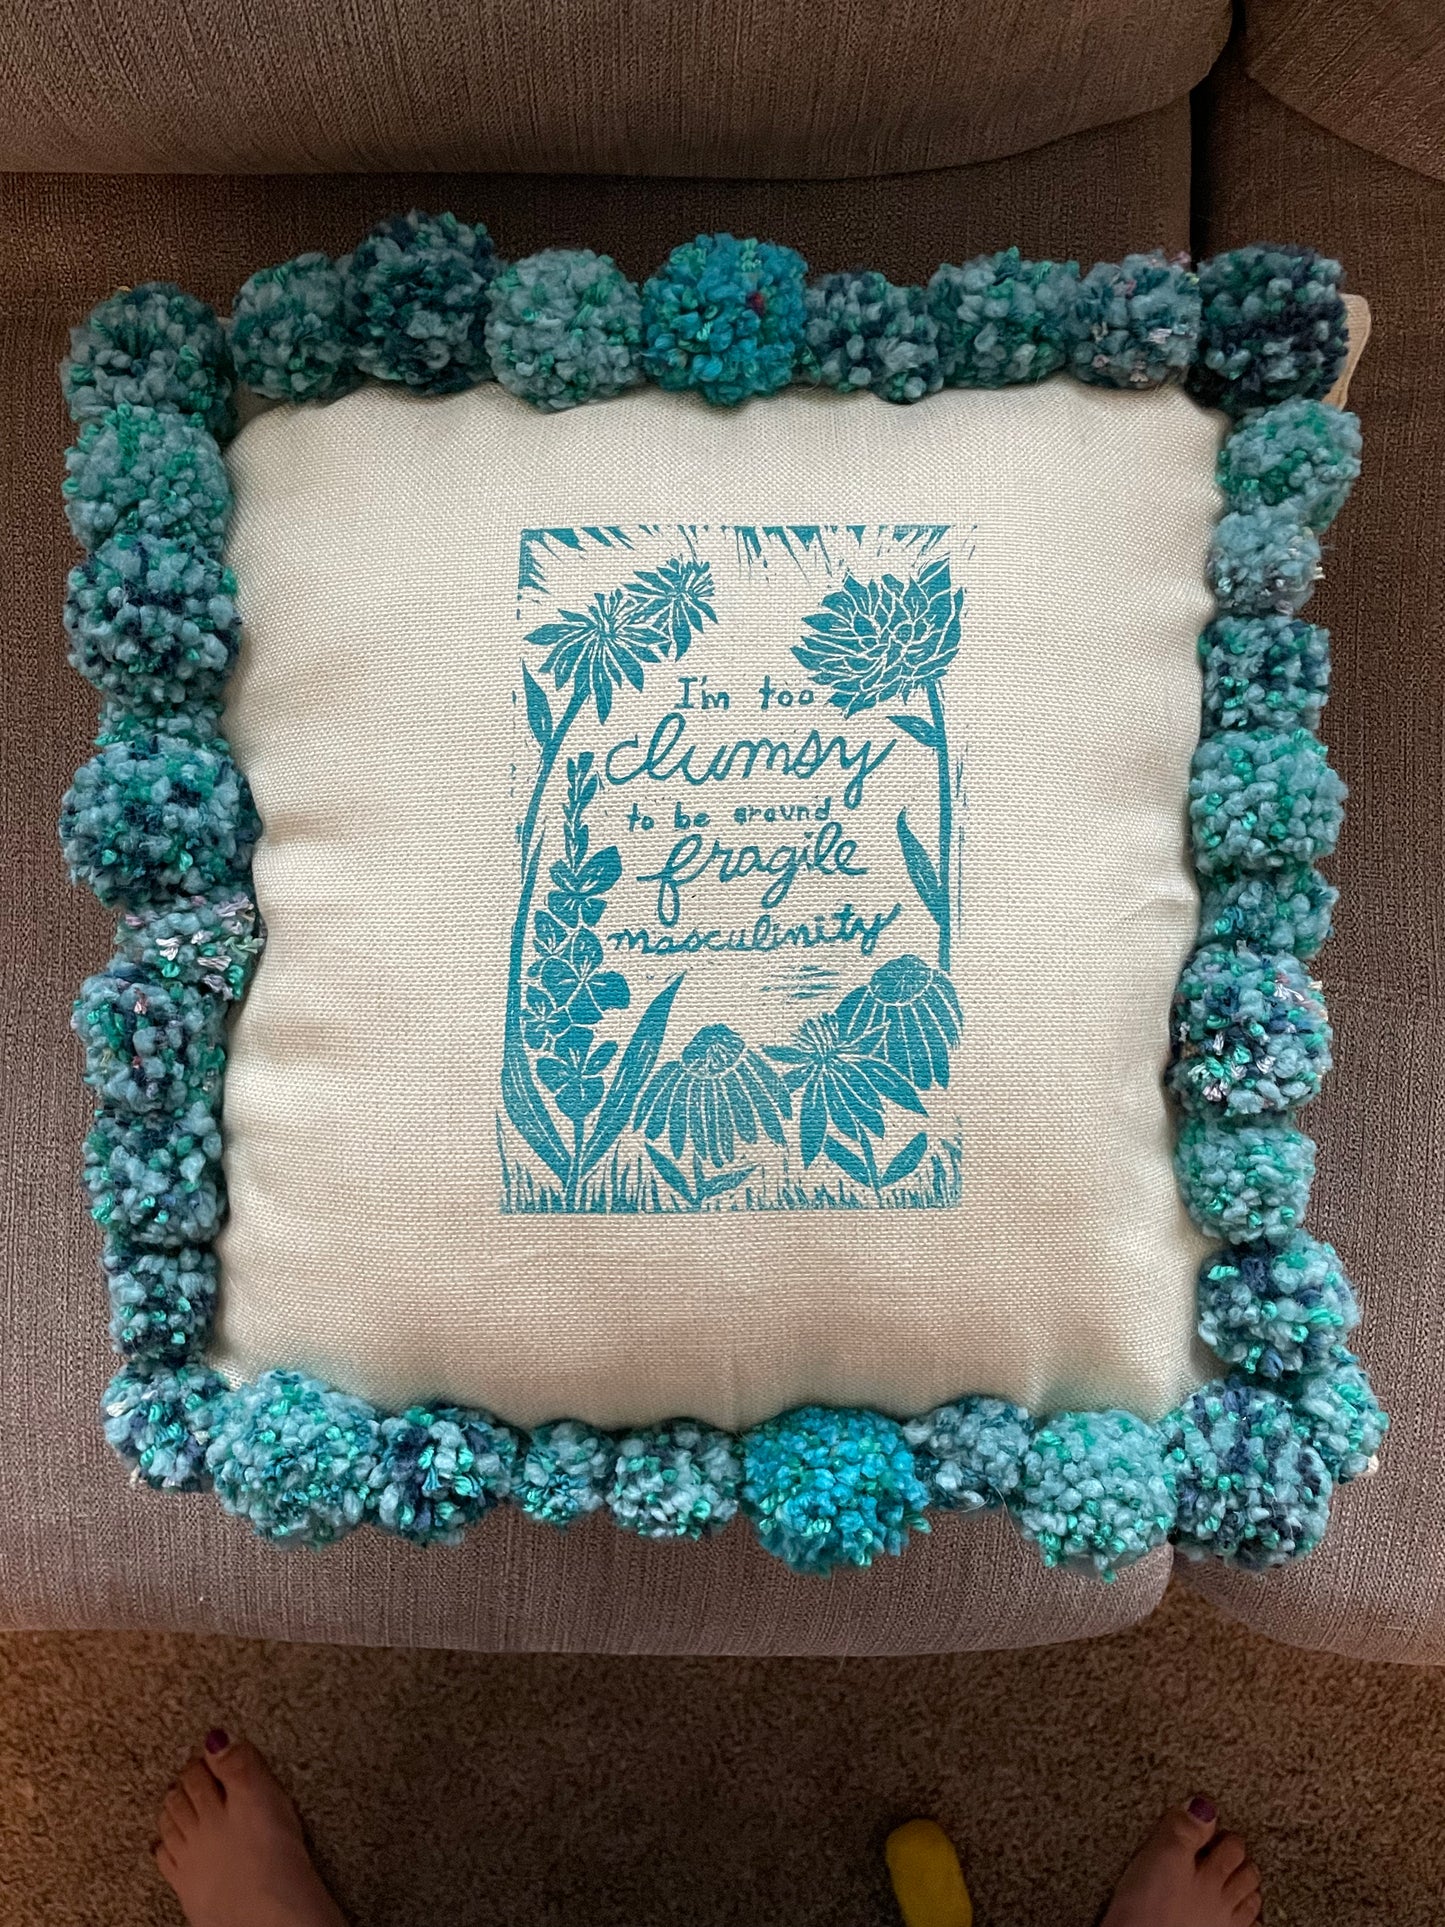 Fragile Masculinity Hand-Printed Teal Pillow with Handmade Pom-Poms